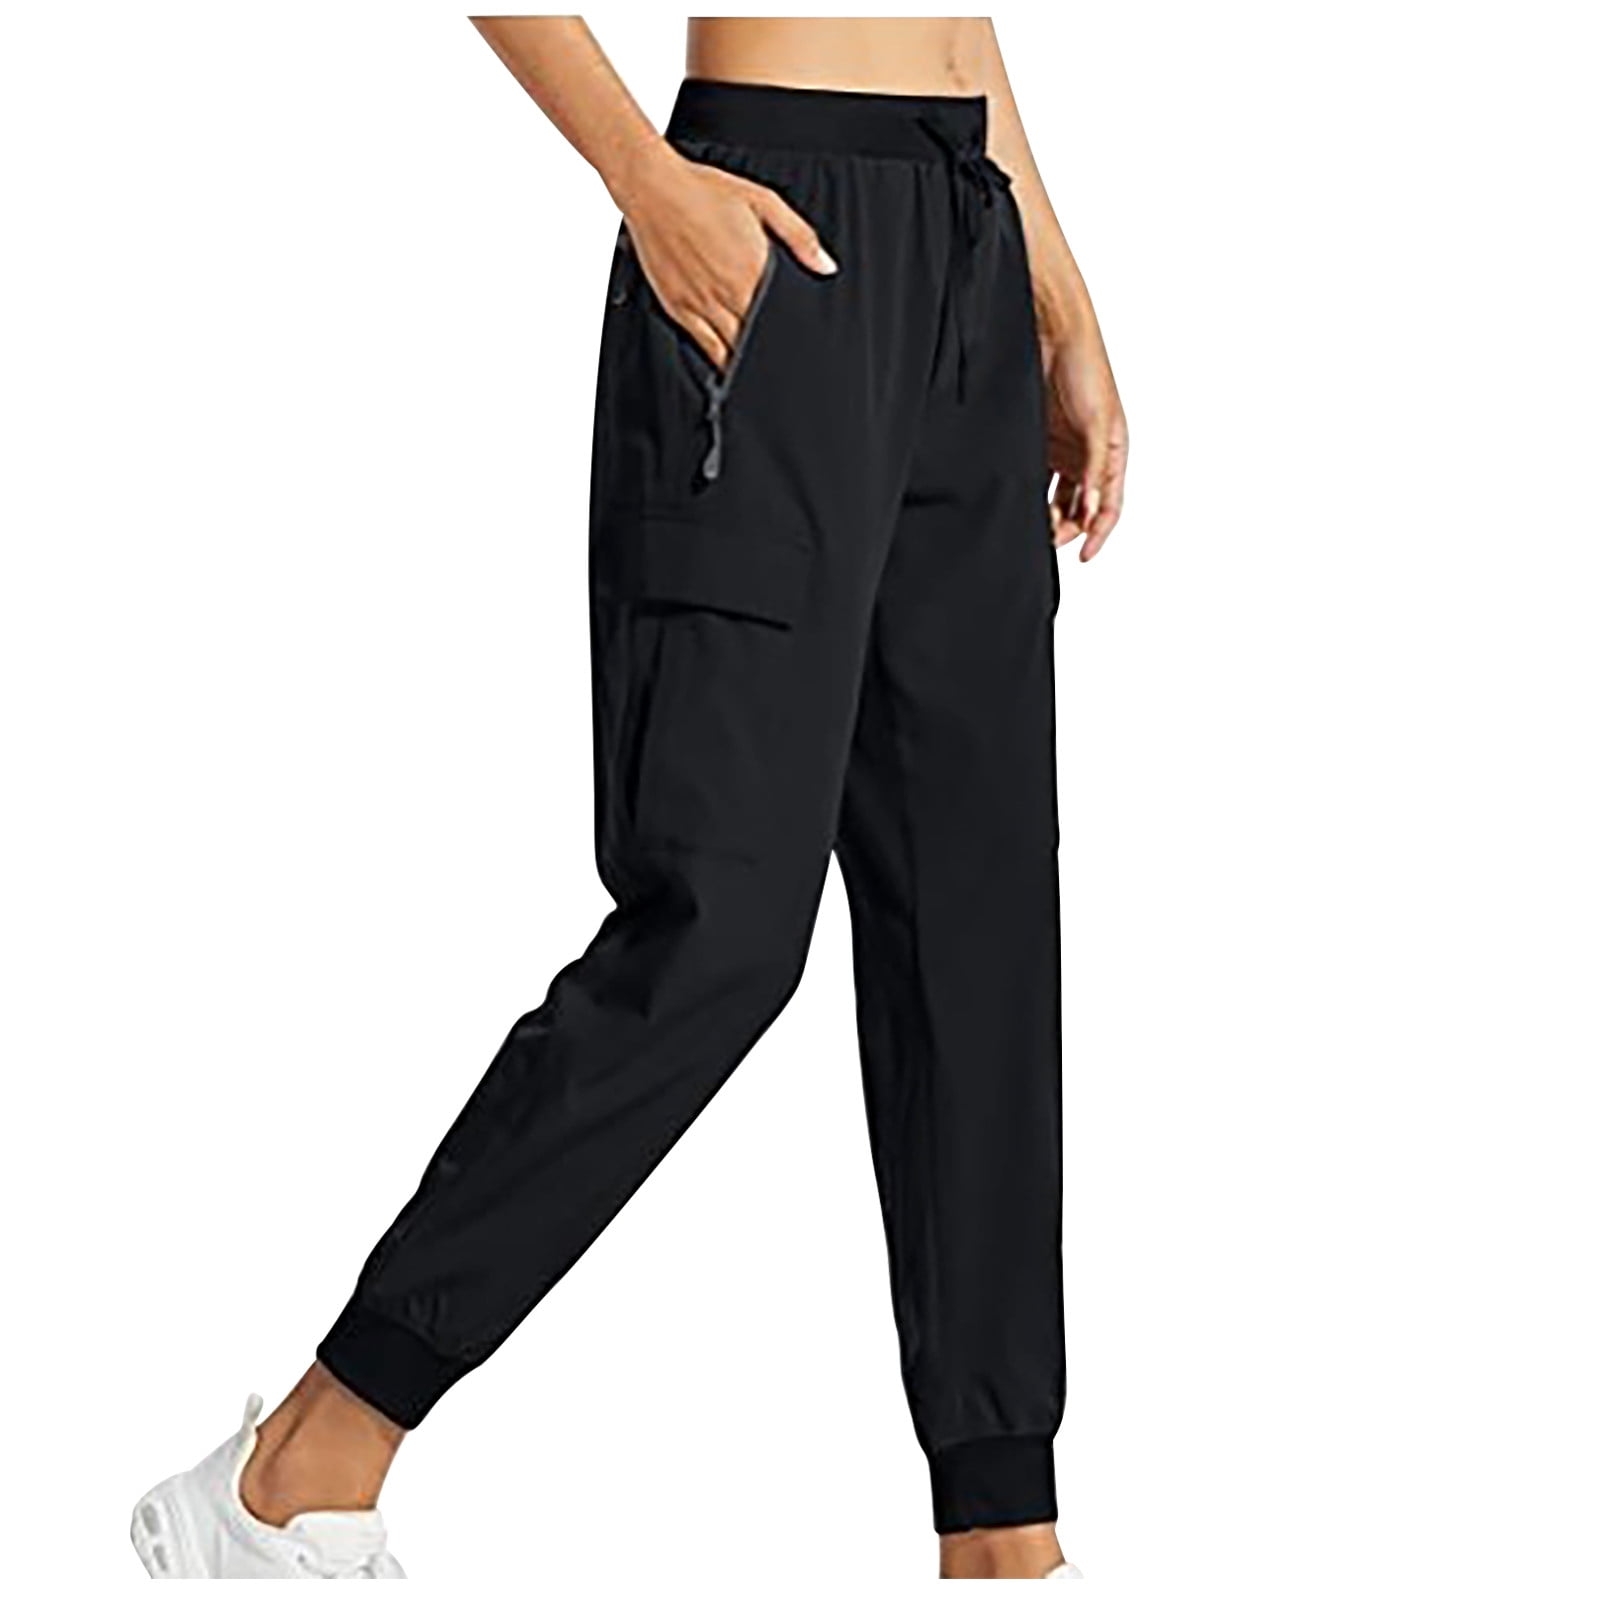 CRZ YOGA Womens Casual 7/8 Pants 25 - Lightweight Workout Outdoor Athletic  Track Travel Lounge Joggers Pockets 25'' Inseam Medium Black